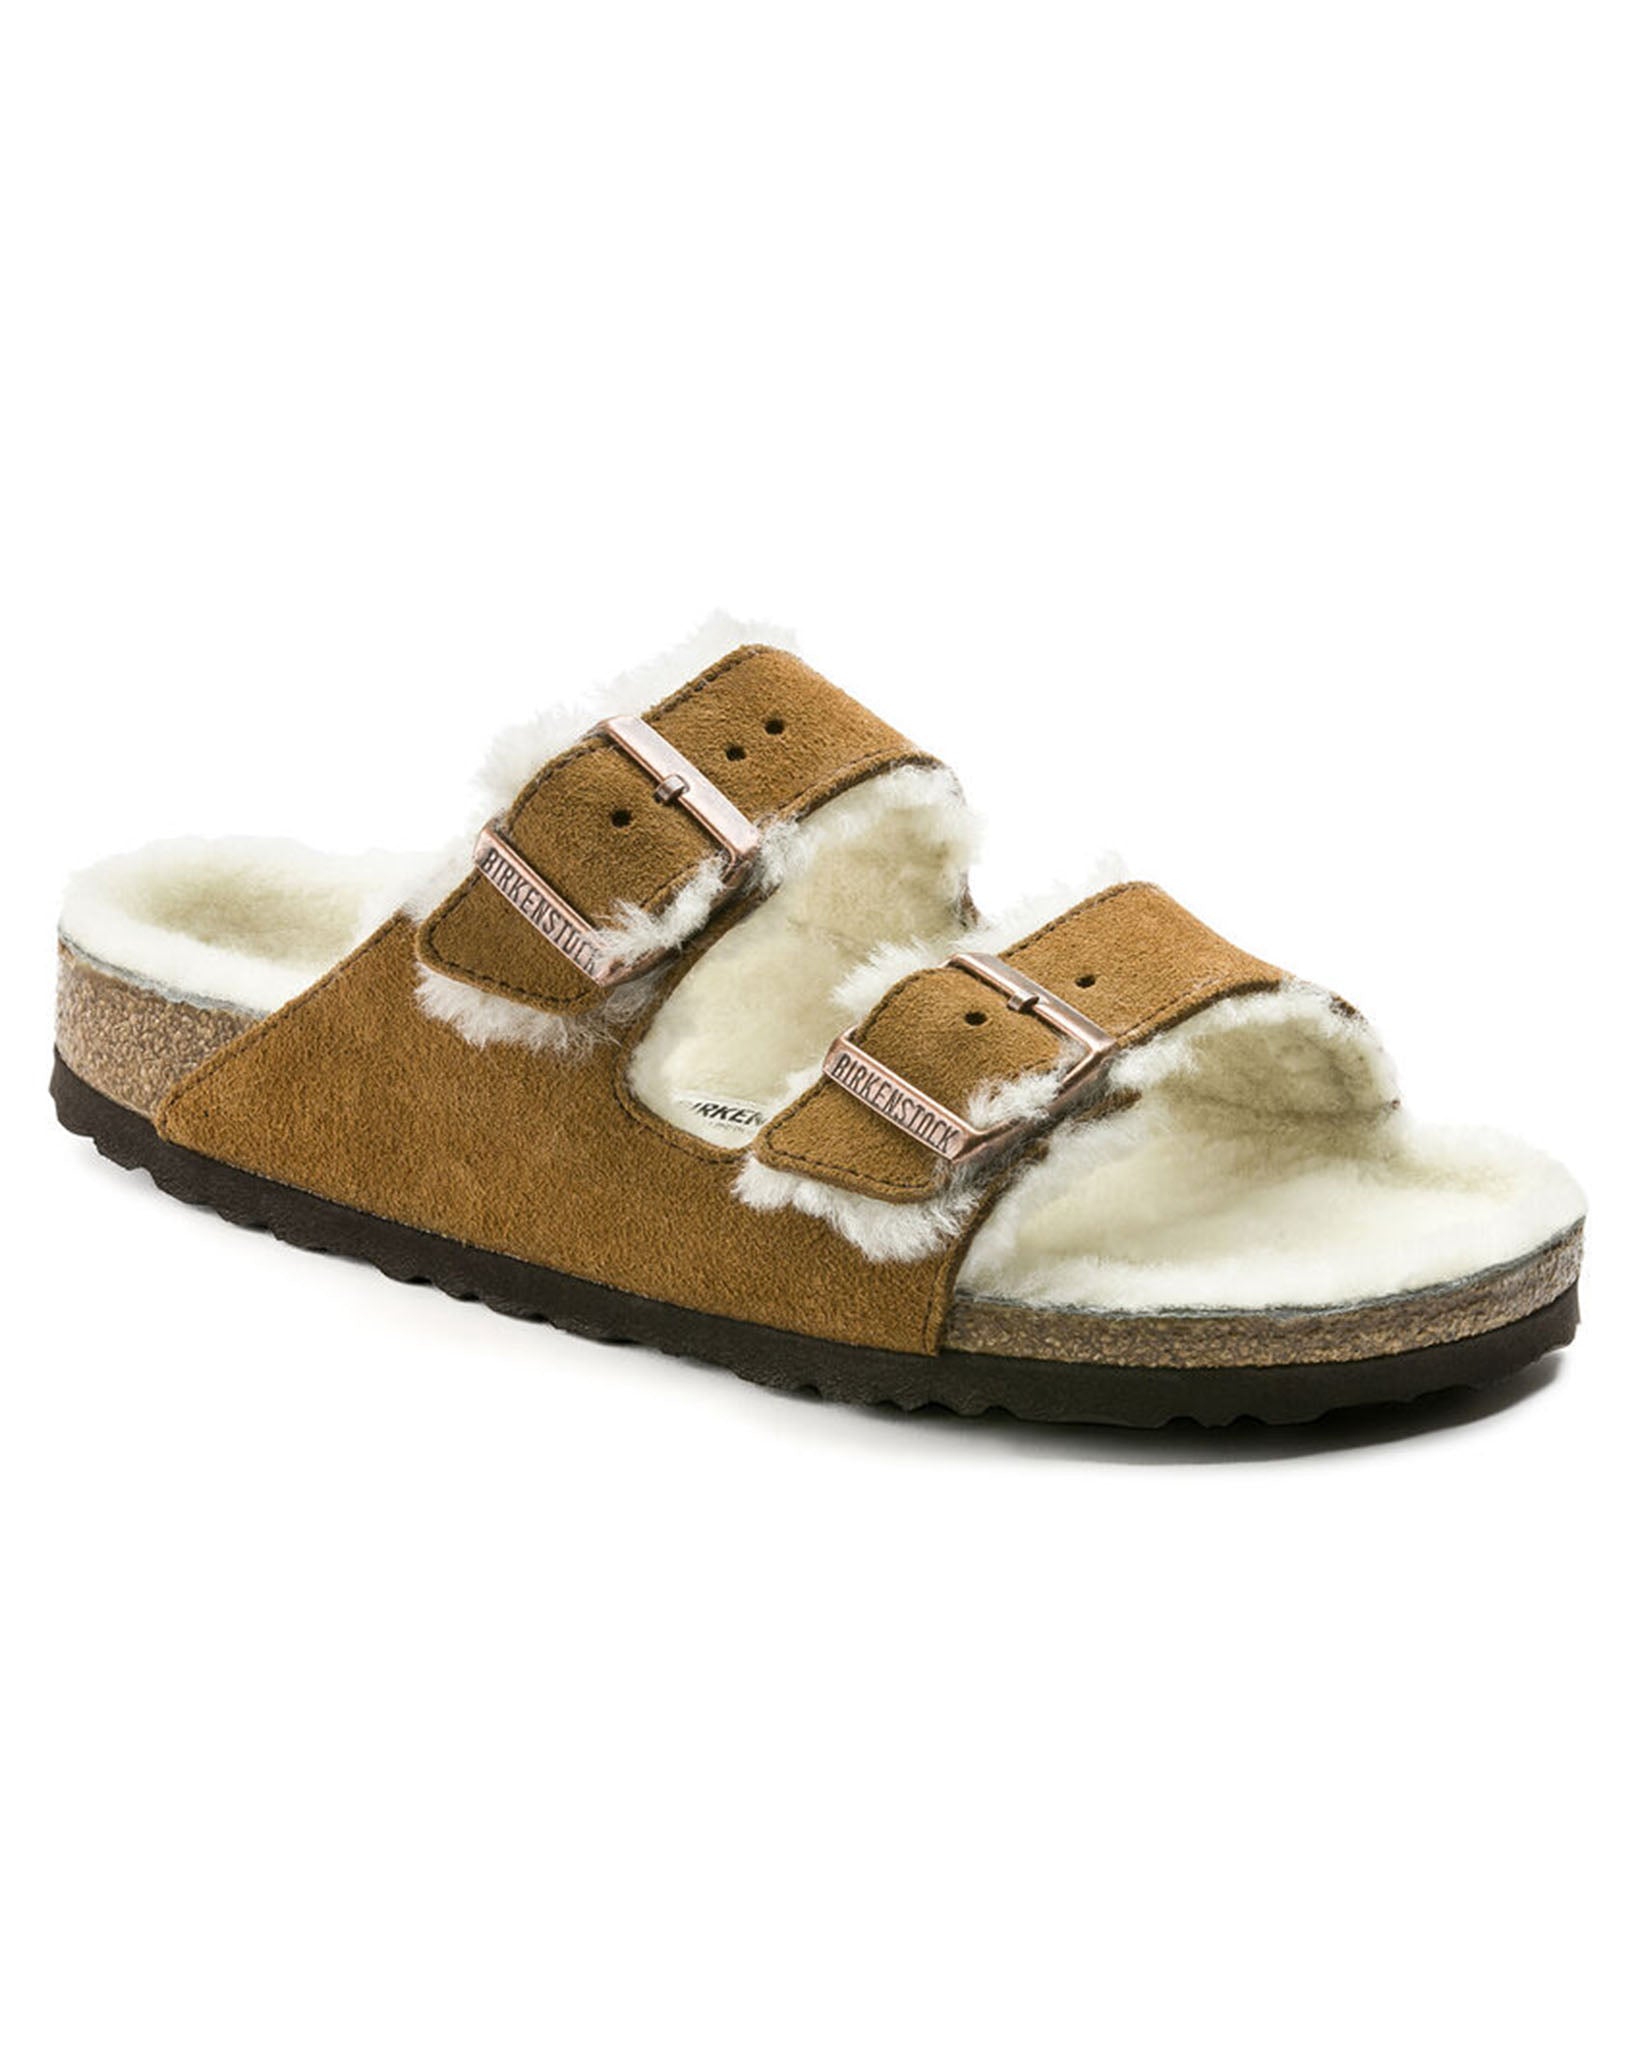 Arizona Shearling Mink Suede Leather Sandals